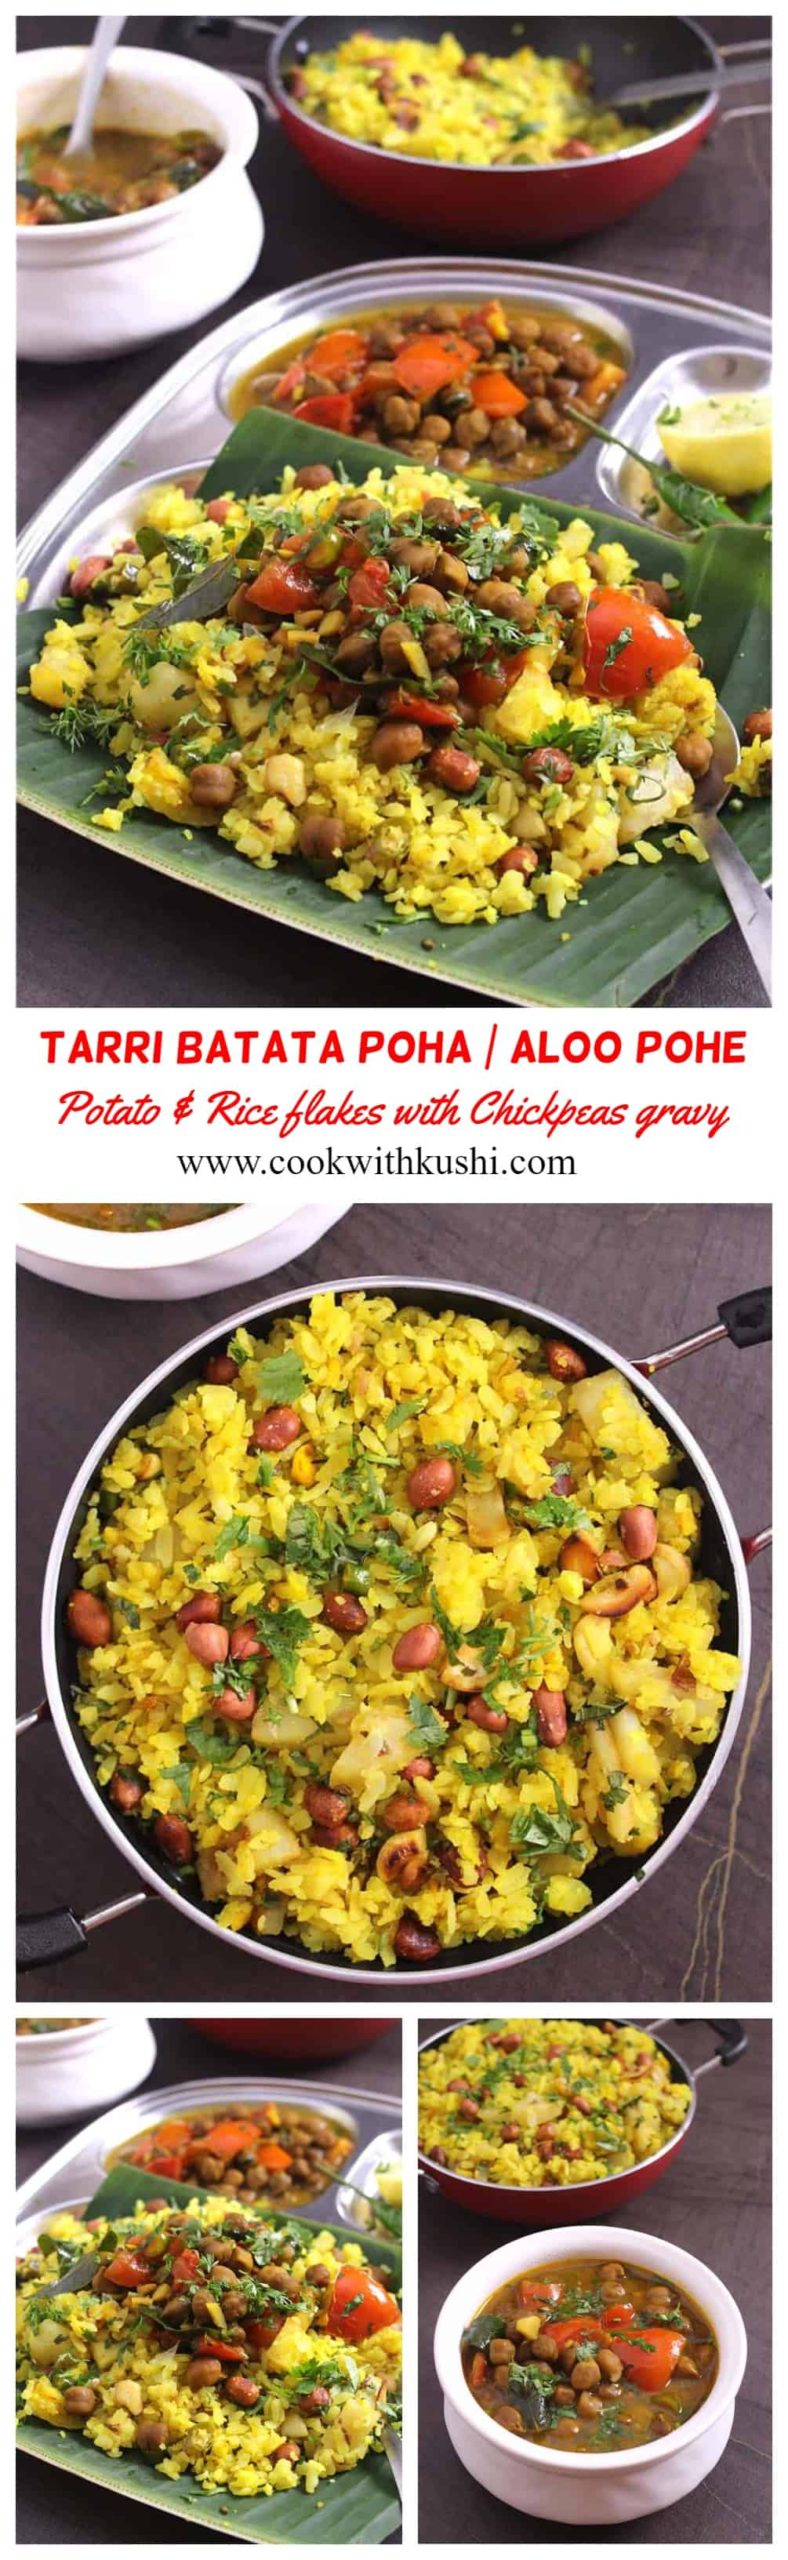 Tarri Batata Poha is a spicy and flavorful, protein-packed, easy-to-make breakfast recipe prepared using chickpeas, poha (rice flakes), and batata (potato) as the main ingredients. #riceflakes #chickpeas #vegan #glutenfree #instantpot #Breakfast #snack #Noonionnogarlic